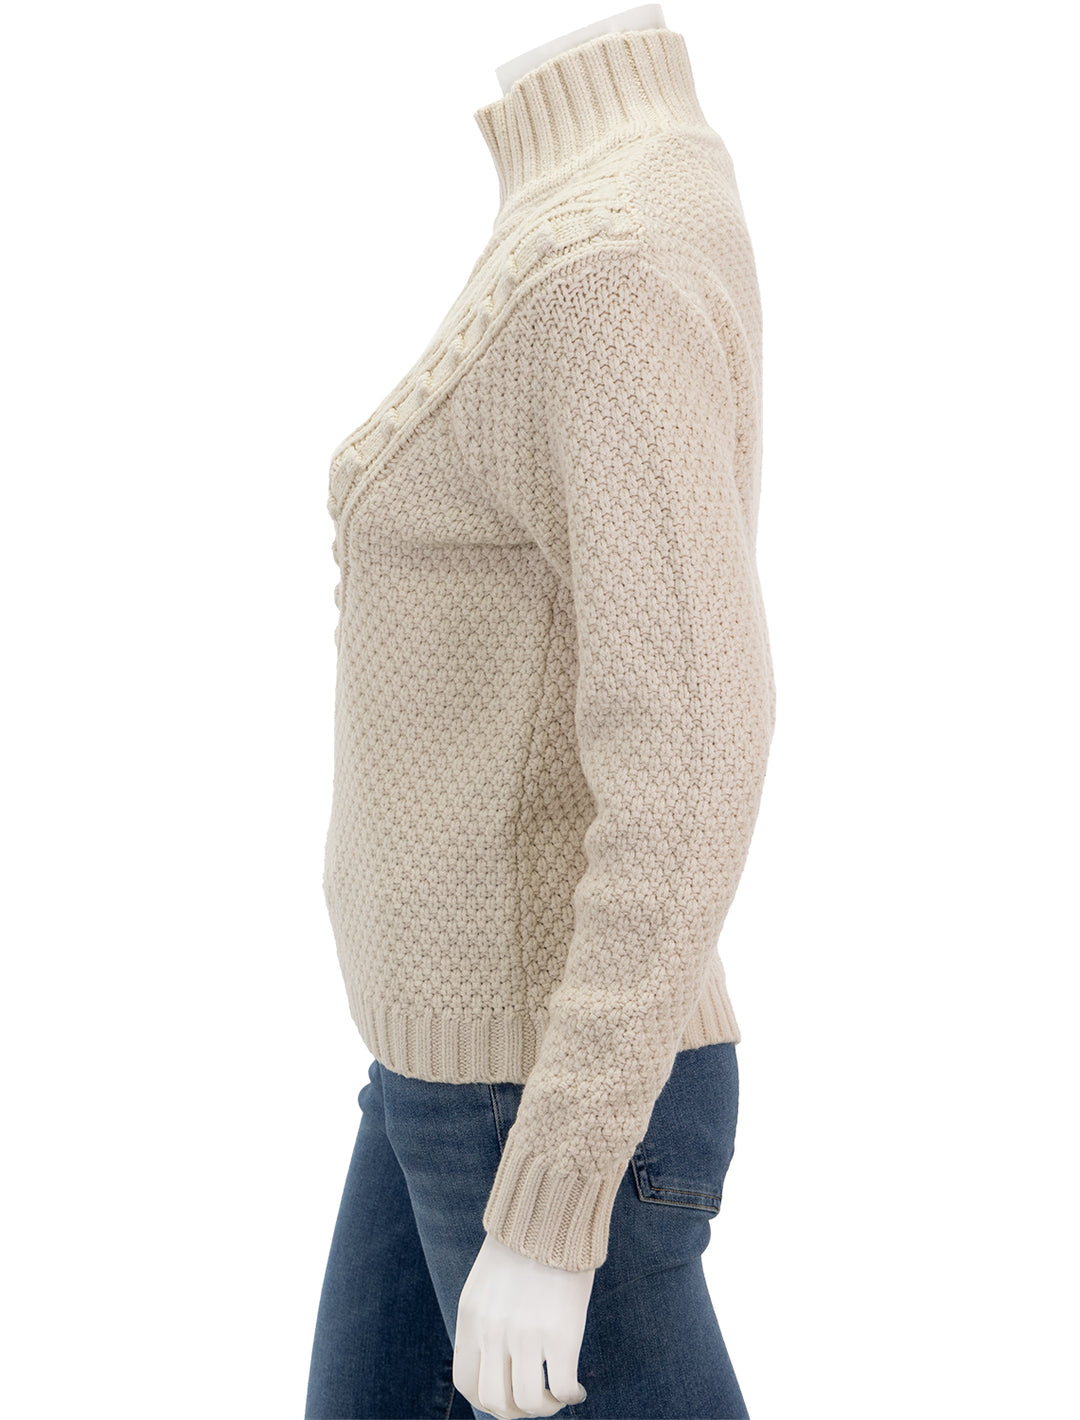 Side view of Splendid's maggie turtleneck sweater in white sand.